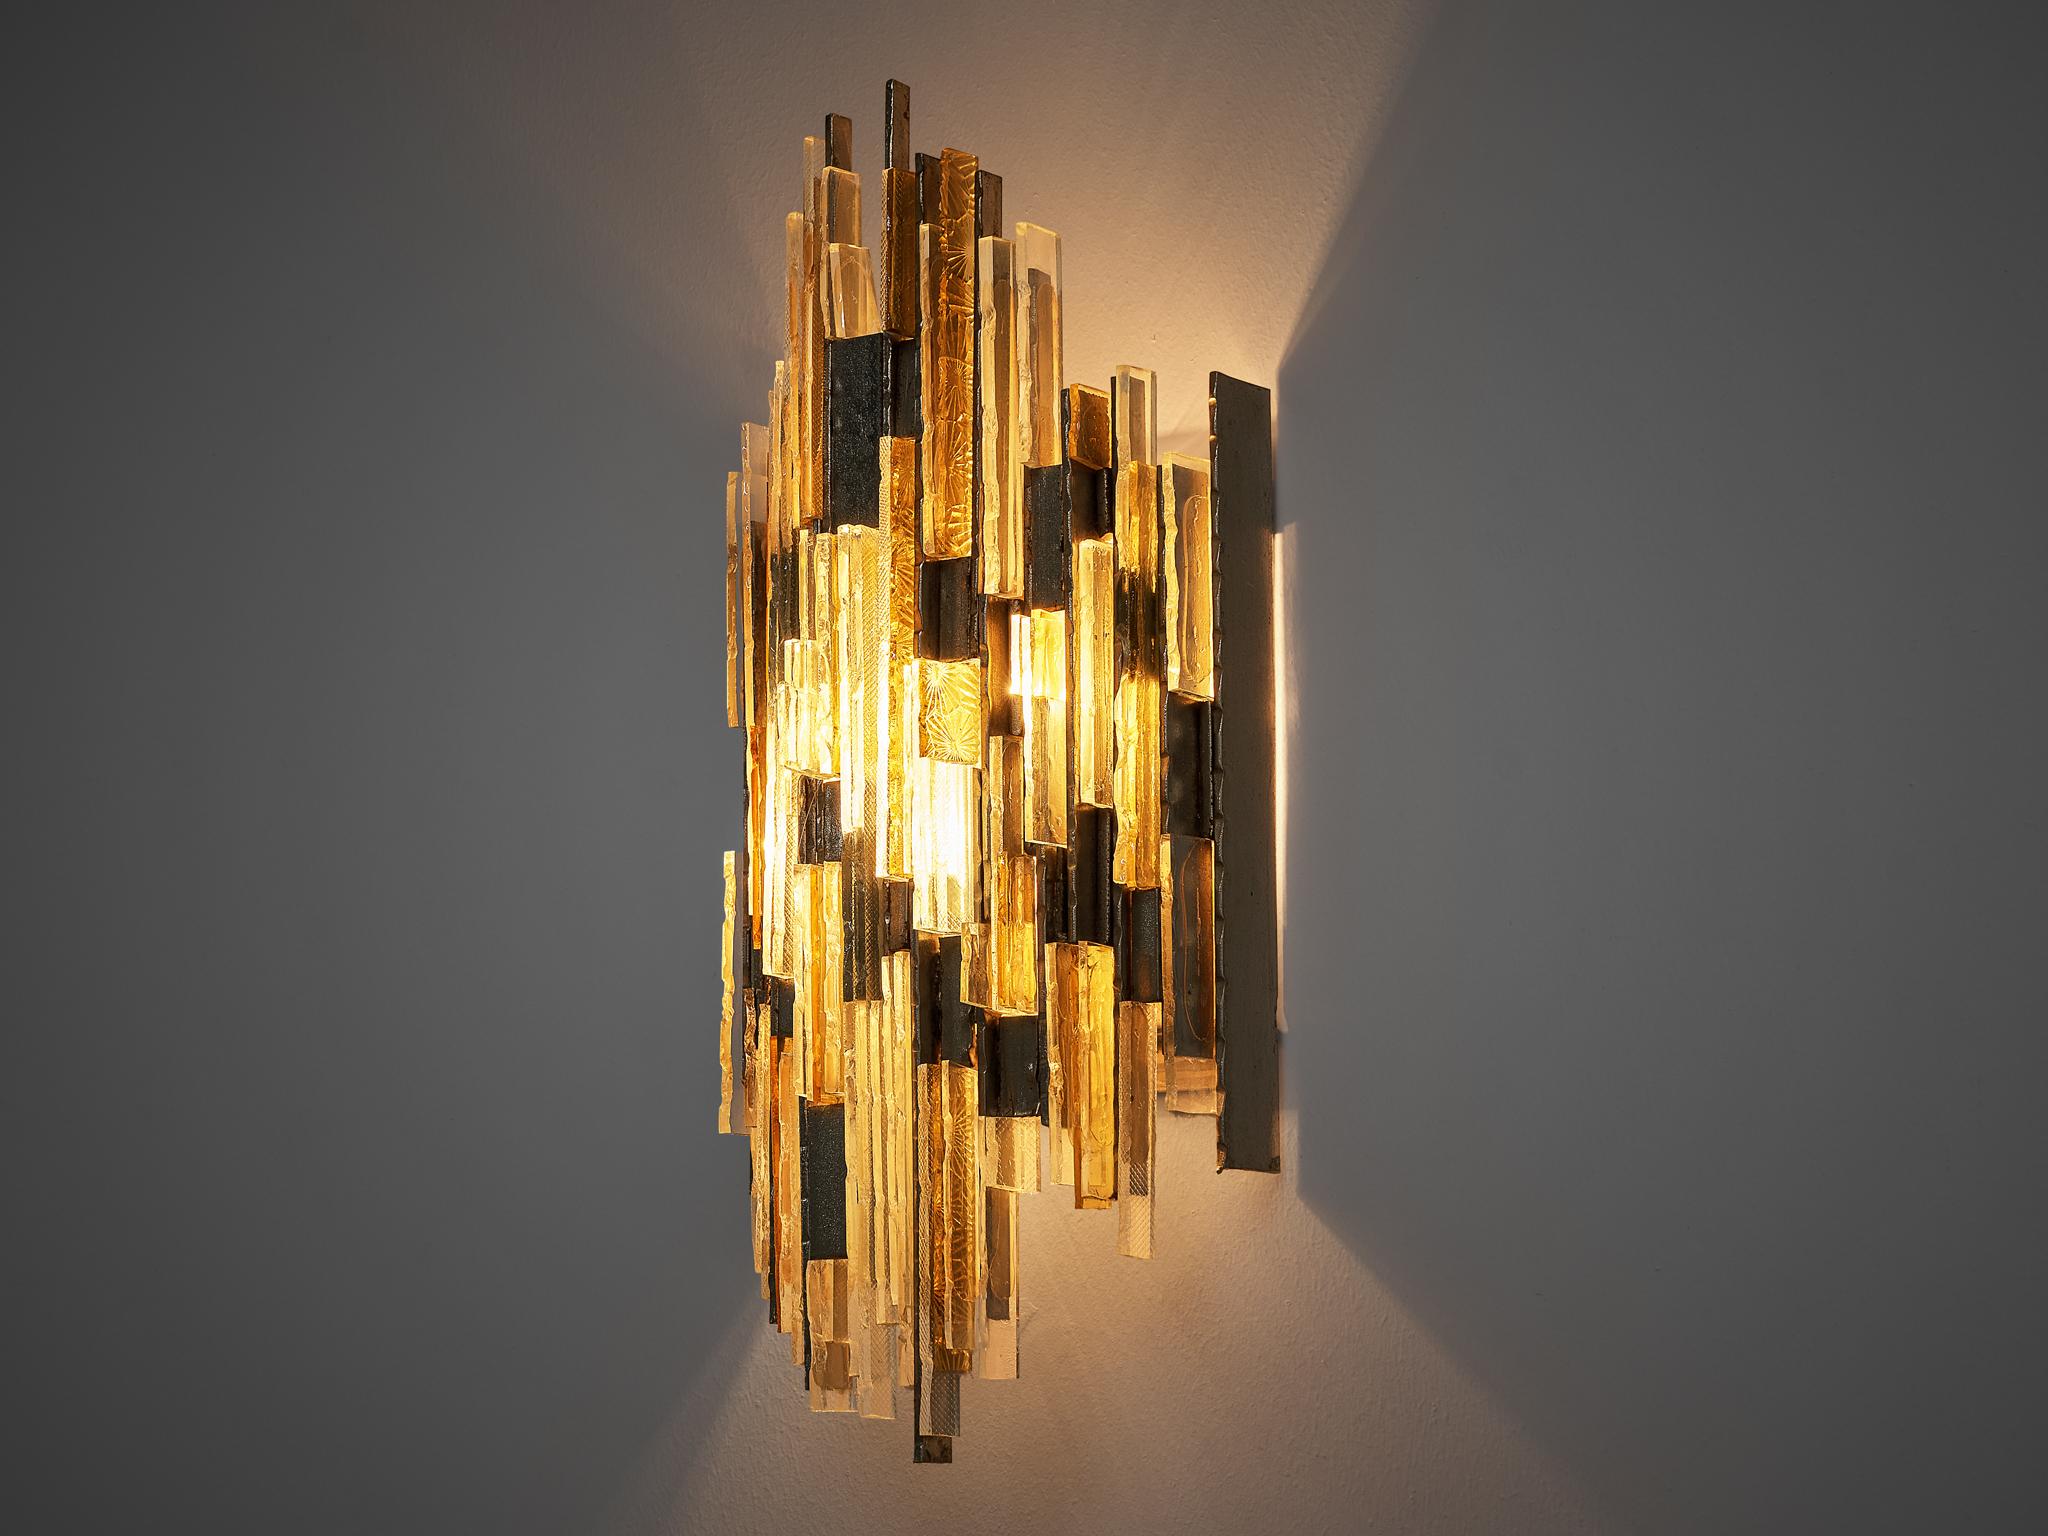 Poliarte, wall light, brass, glass, Italy, 1960s

Very sculptural wall light created by Poliarte in the 1960s. The transparant and amber chiselled glass create a unique design and are structured into different rows. They are contrasted by pieces